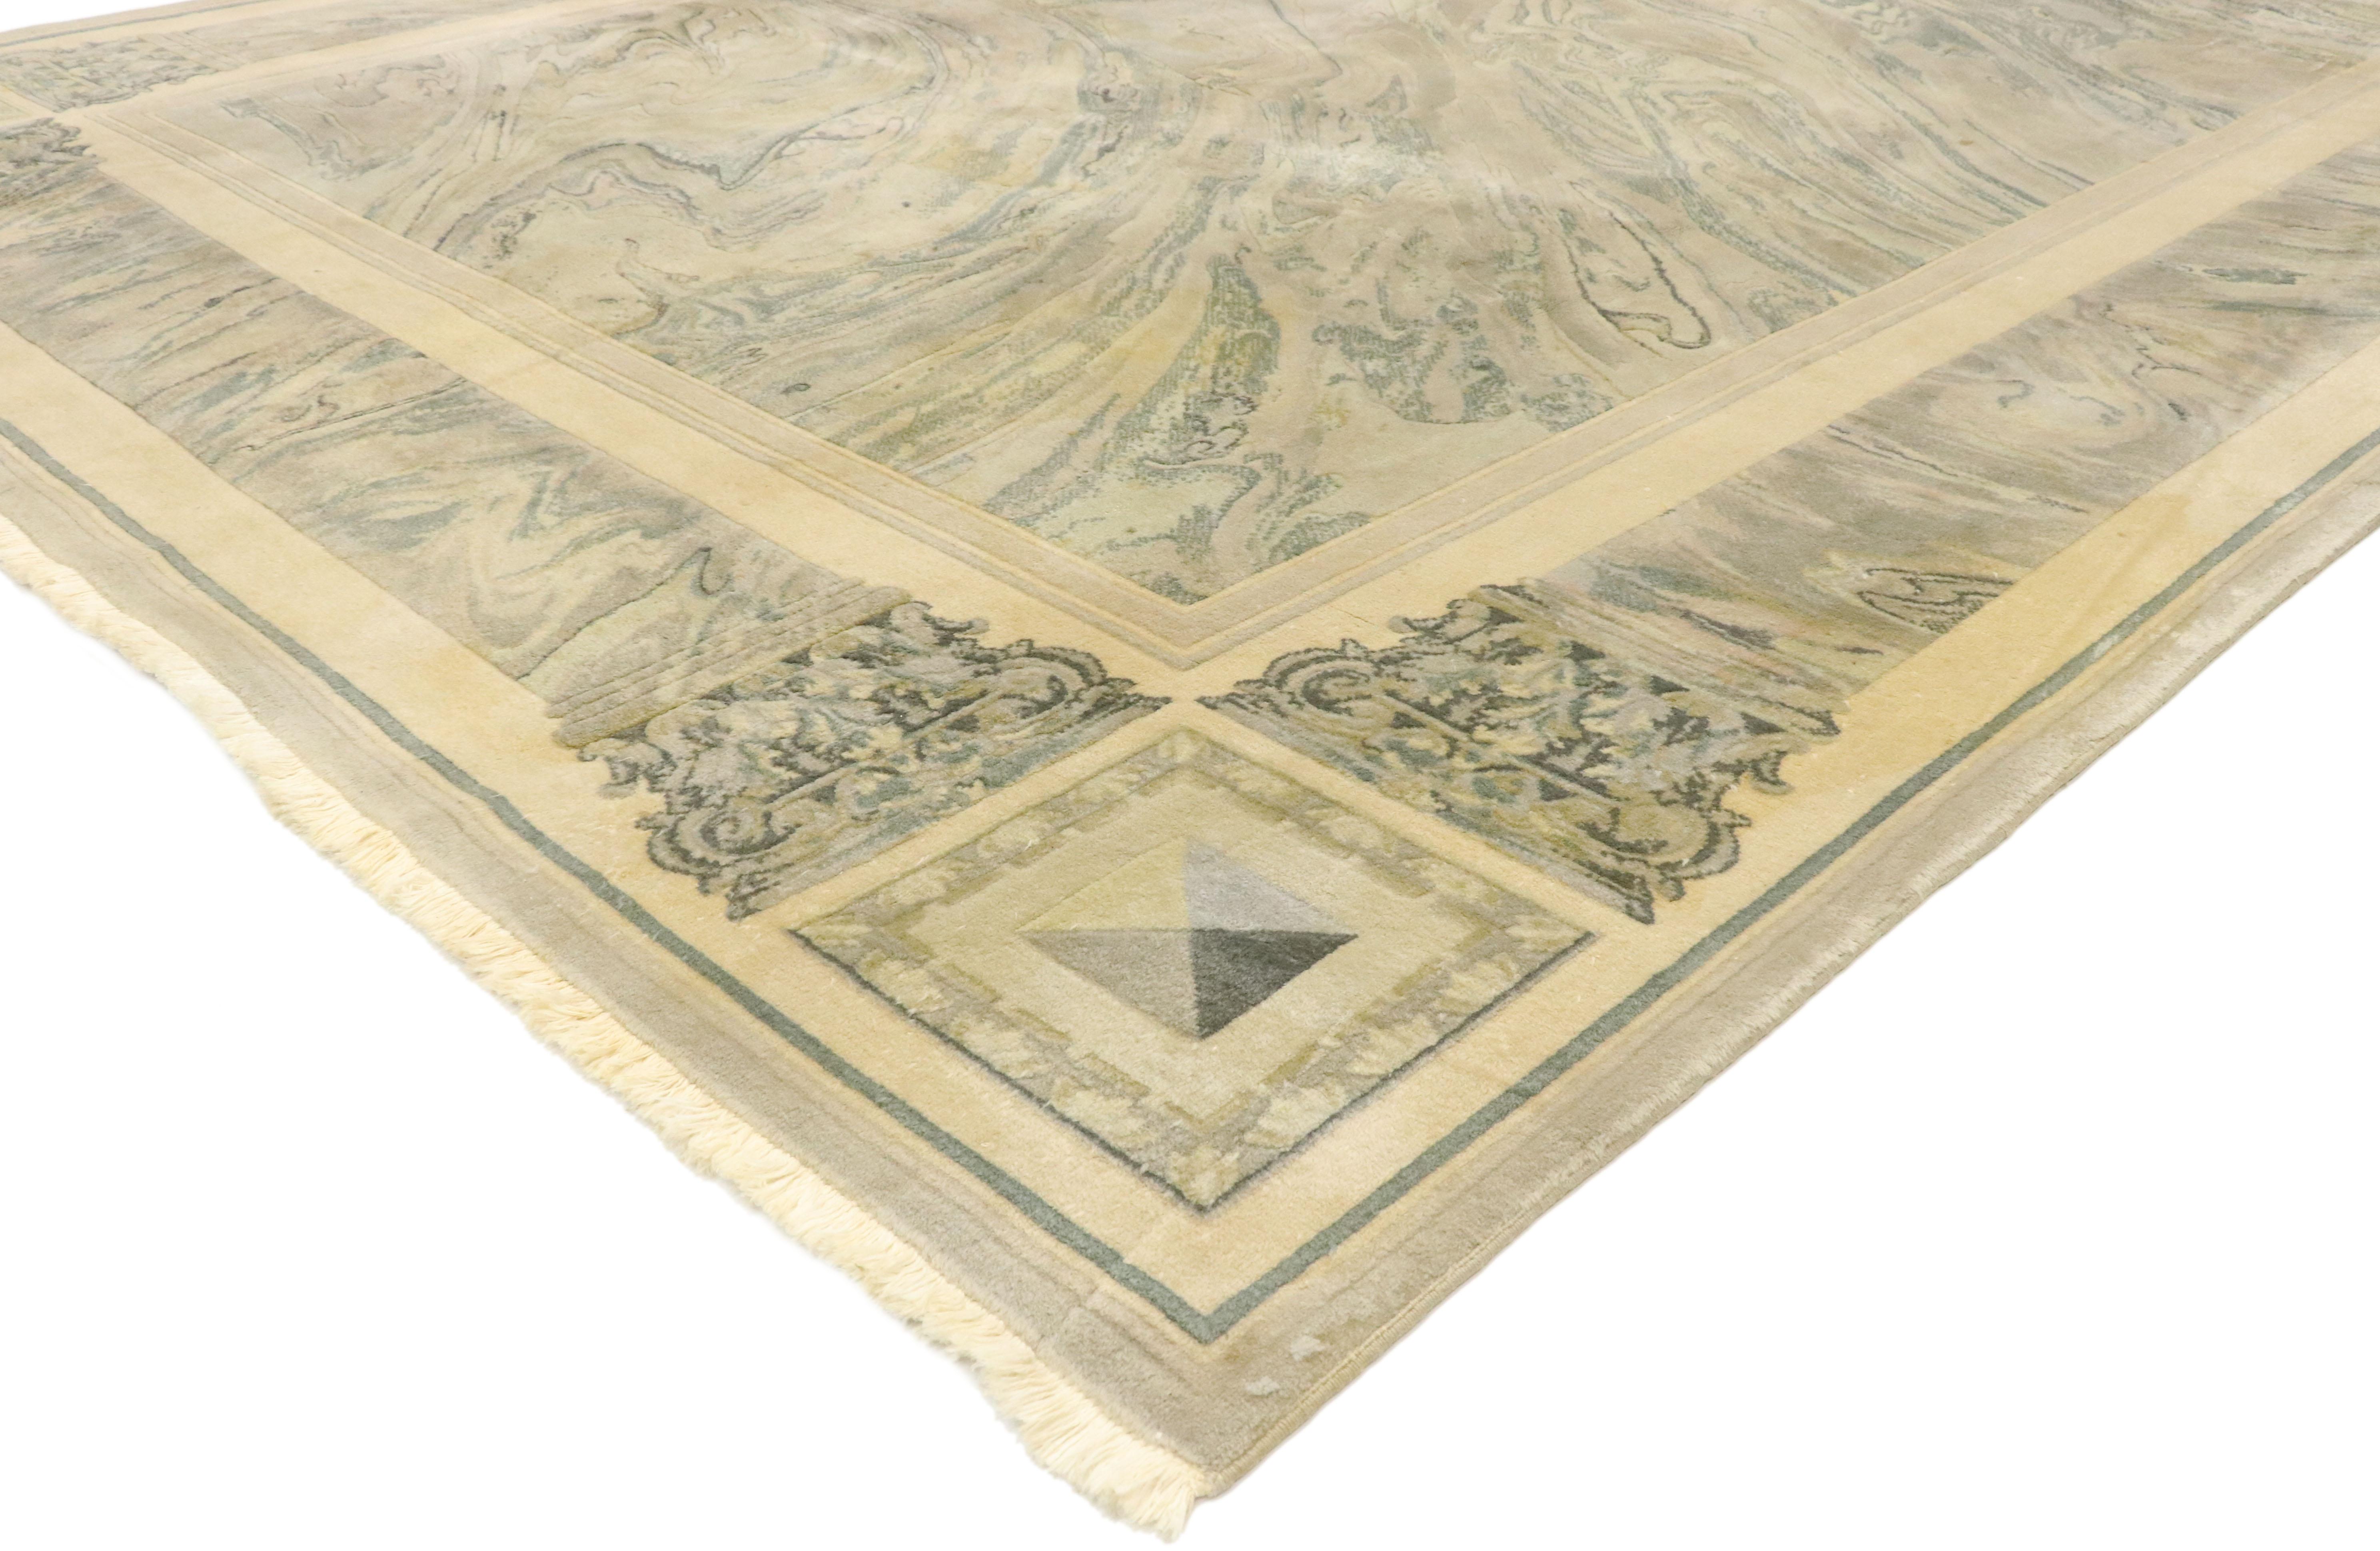 77455, vintage Chinese abstract marble print rug with modern neoclassical baroque style 08'00 x 11'04. Effortless beauty and simplicity meet soft, bespoke vibes with a modern neoclassical style in this hand knotted wool vintage Chinese rug. The